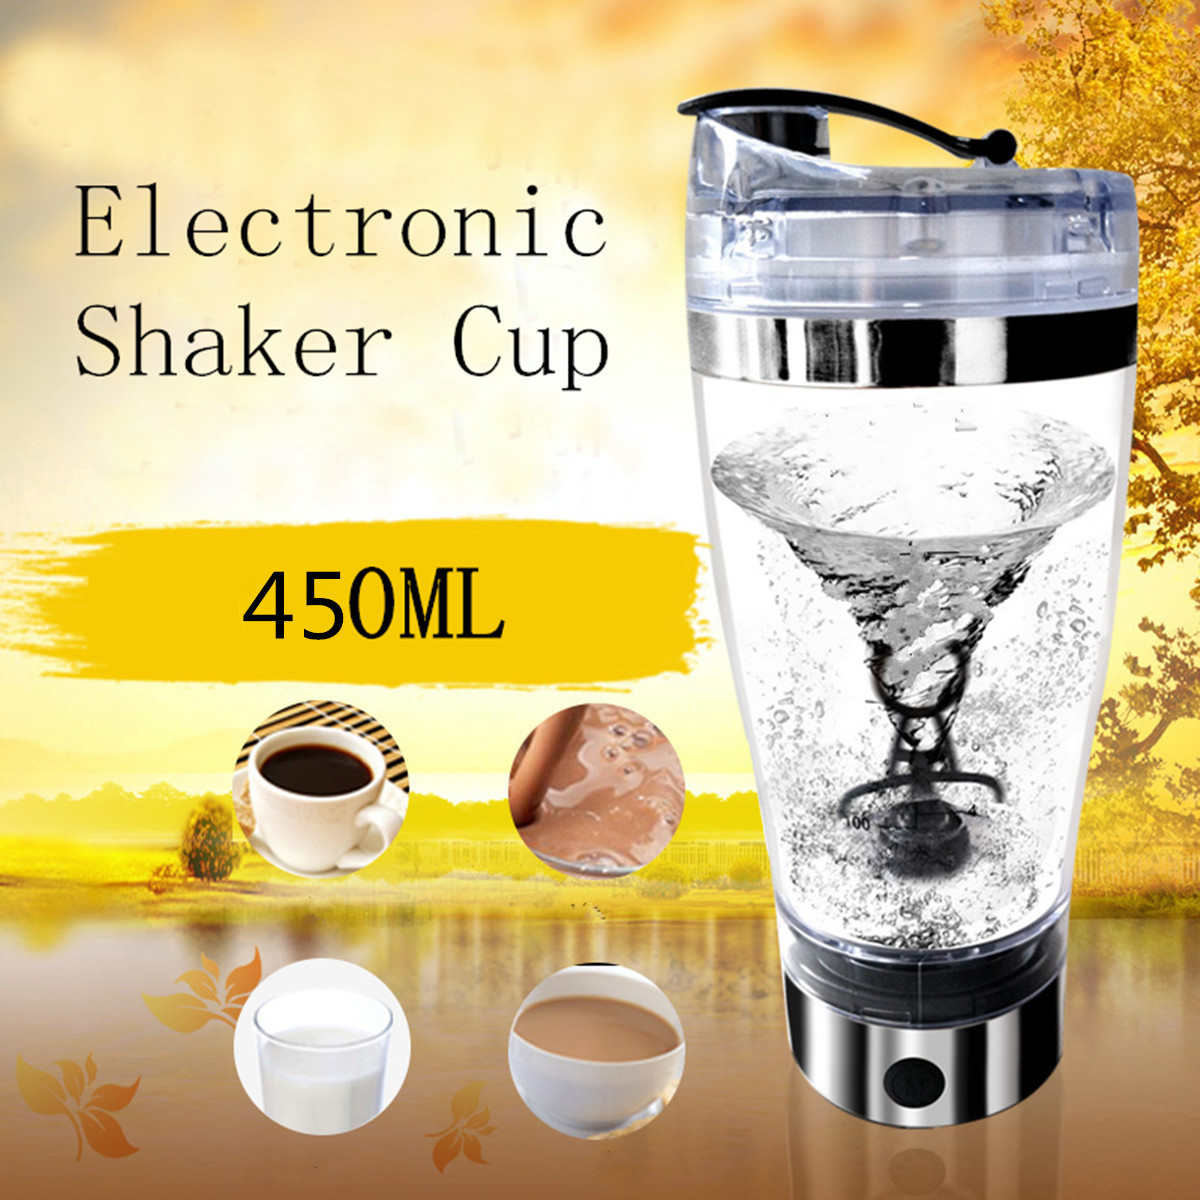 450ML-USB-Charging-Electric-Shaker-Cup-Blender-Detachable-Mixing-Cup-Fitness-Protein-Powder-Shake-Cu-1637799-1